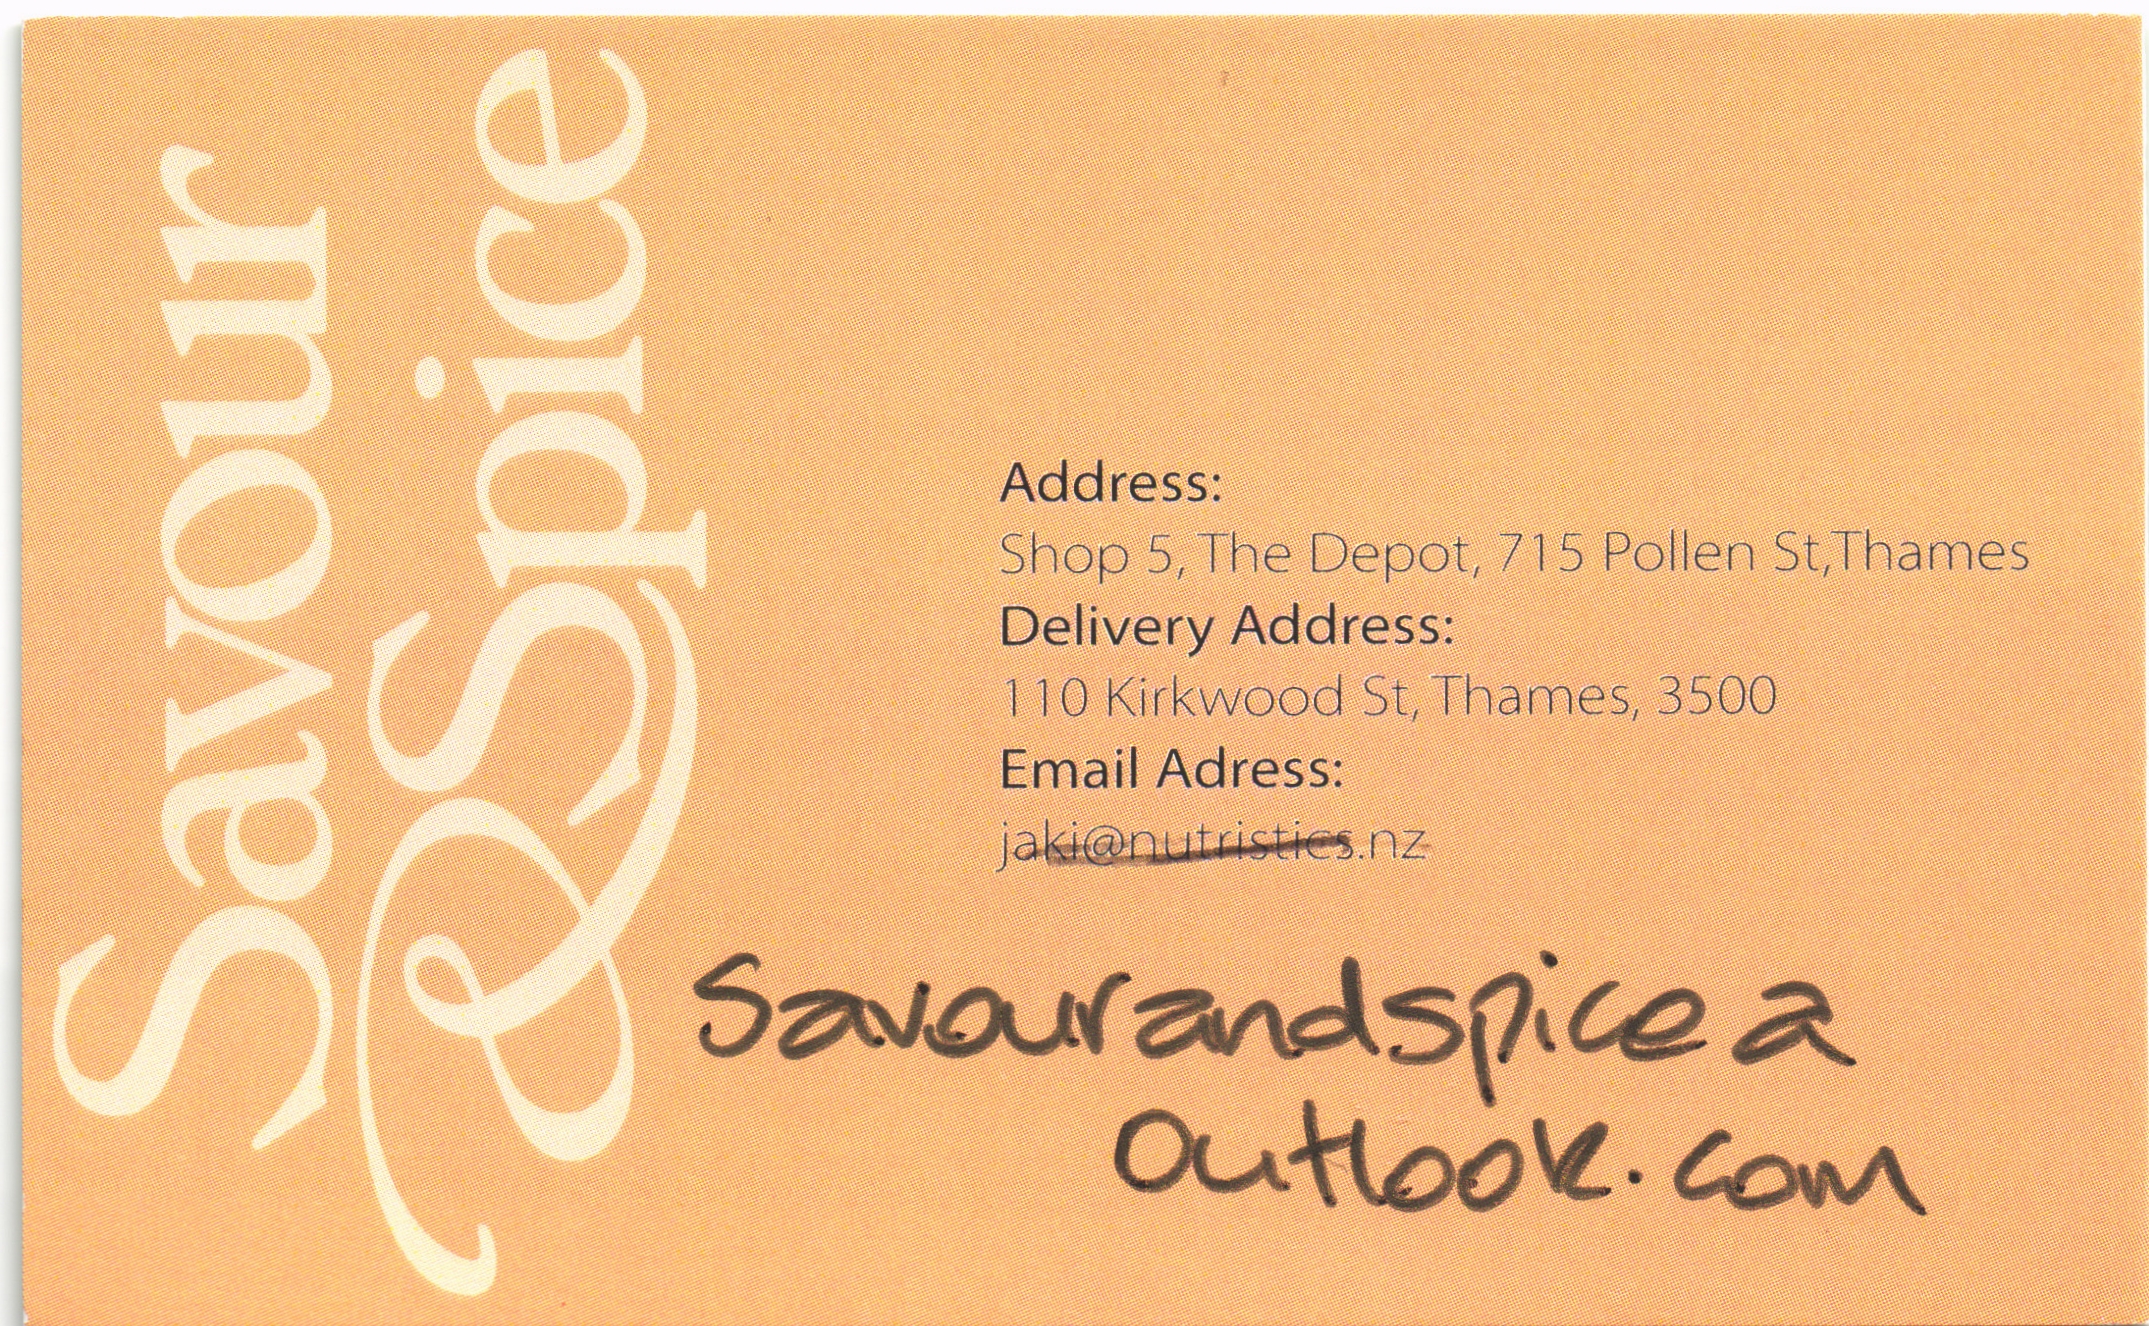 Savour and Spice Card Back